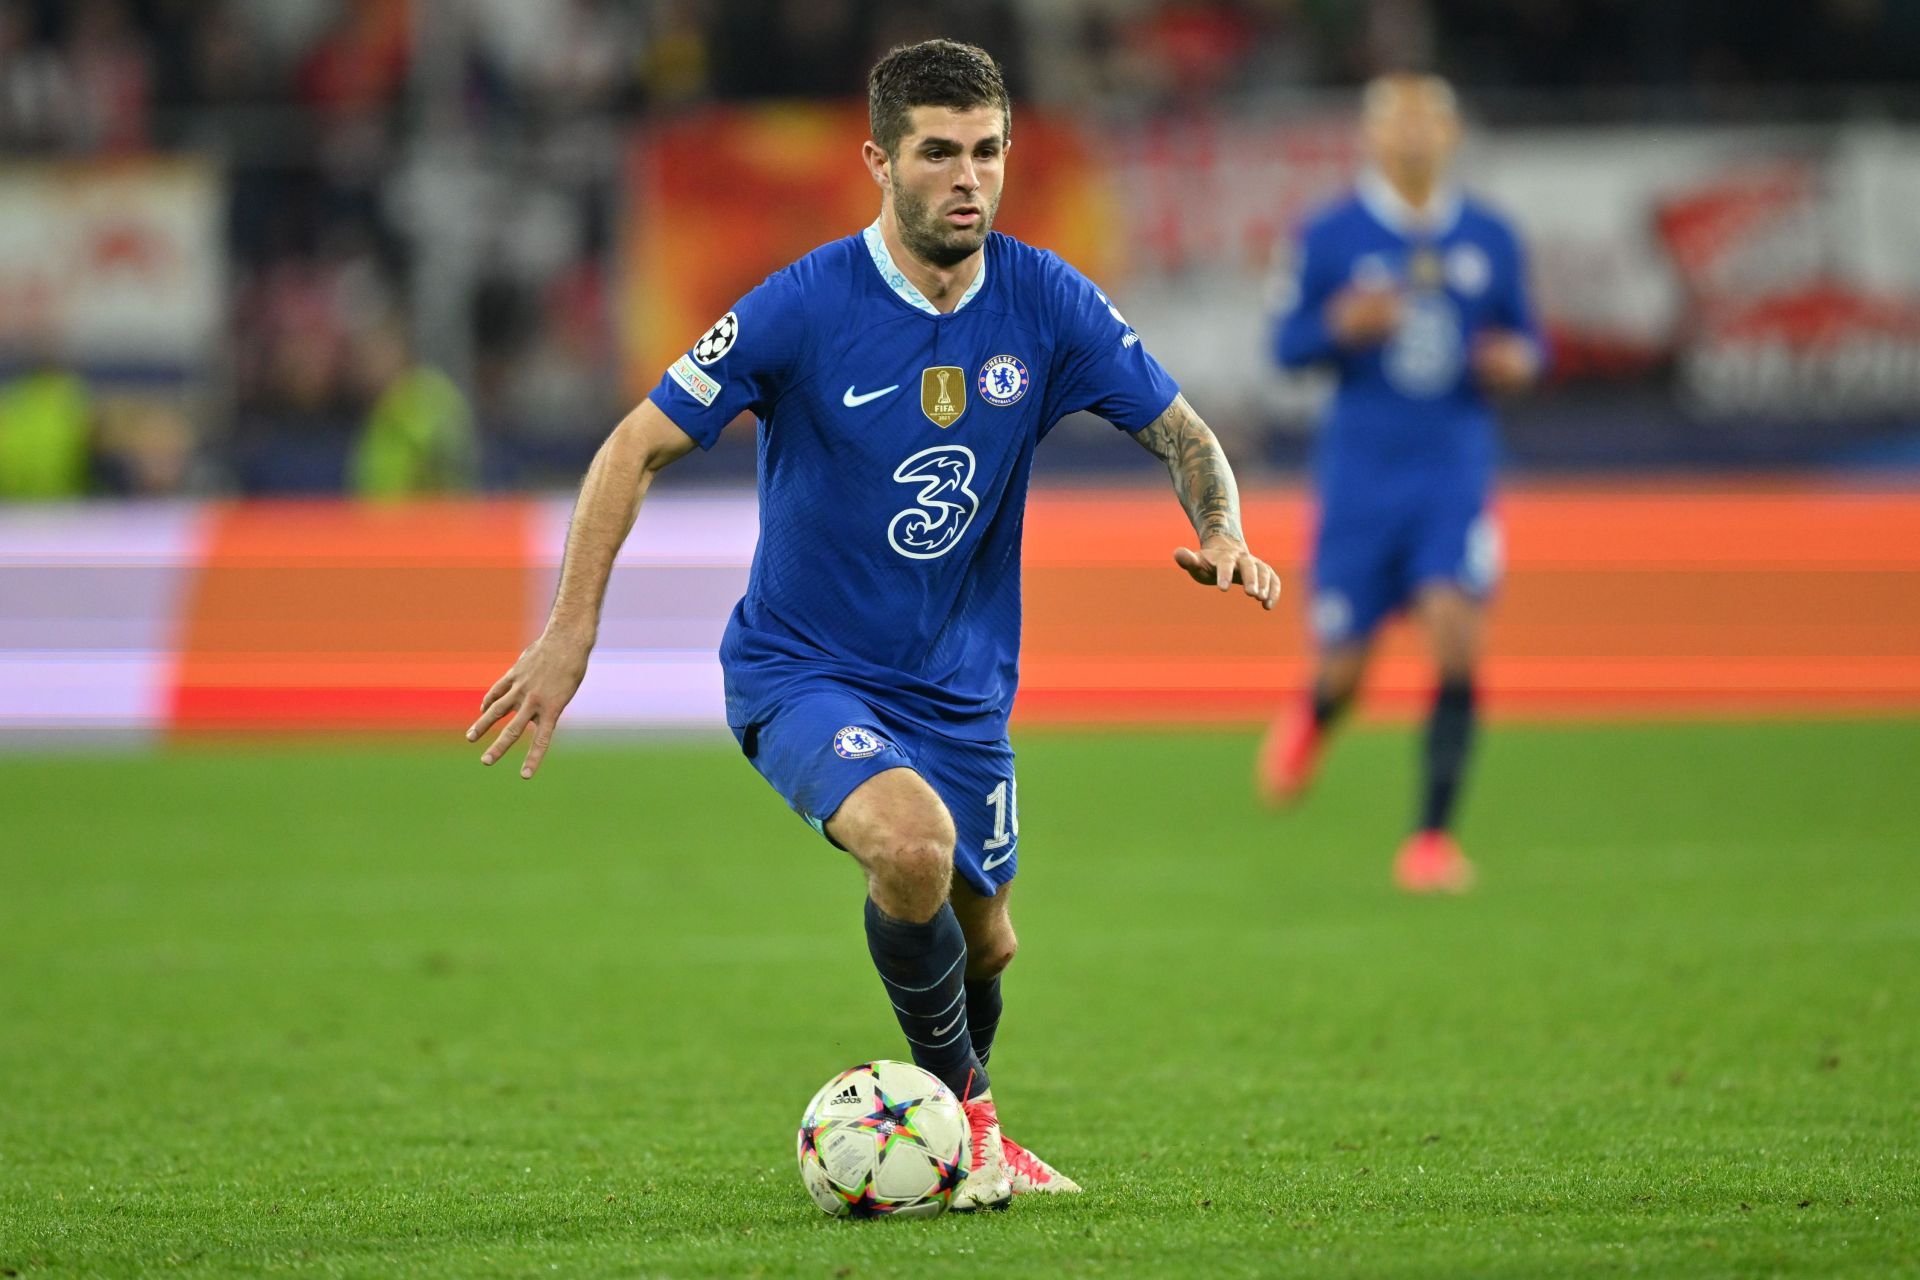 Christian Pulisic in action v FC Salzburg in the UEFA Champions League